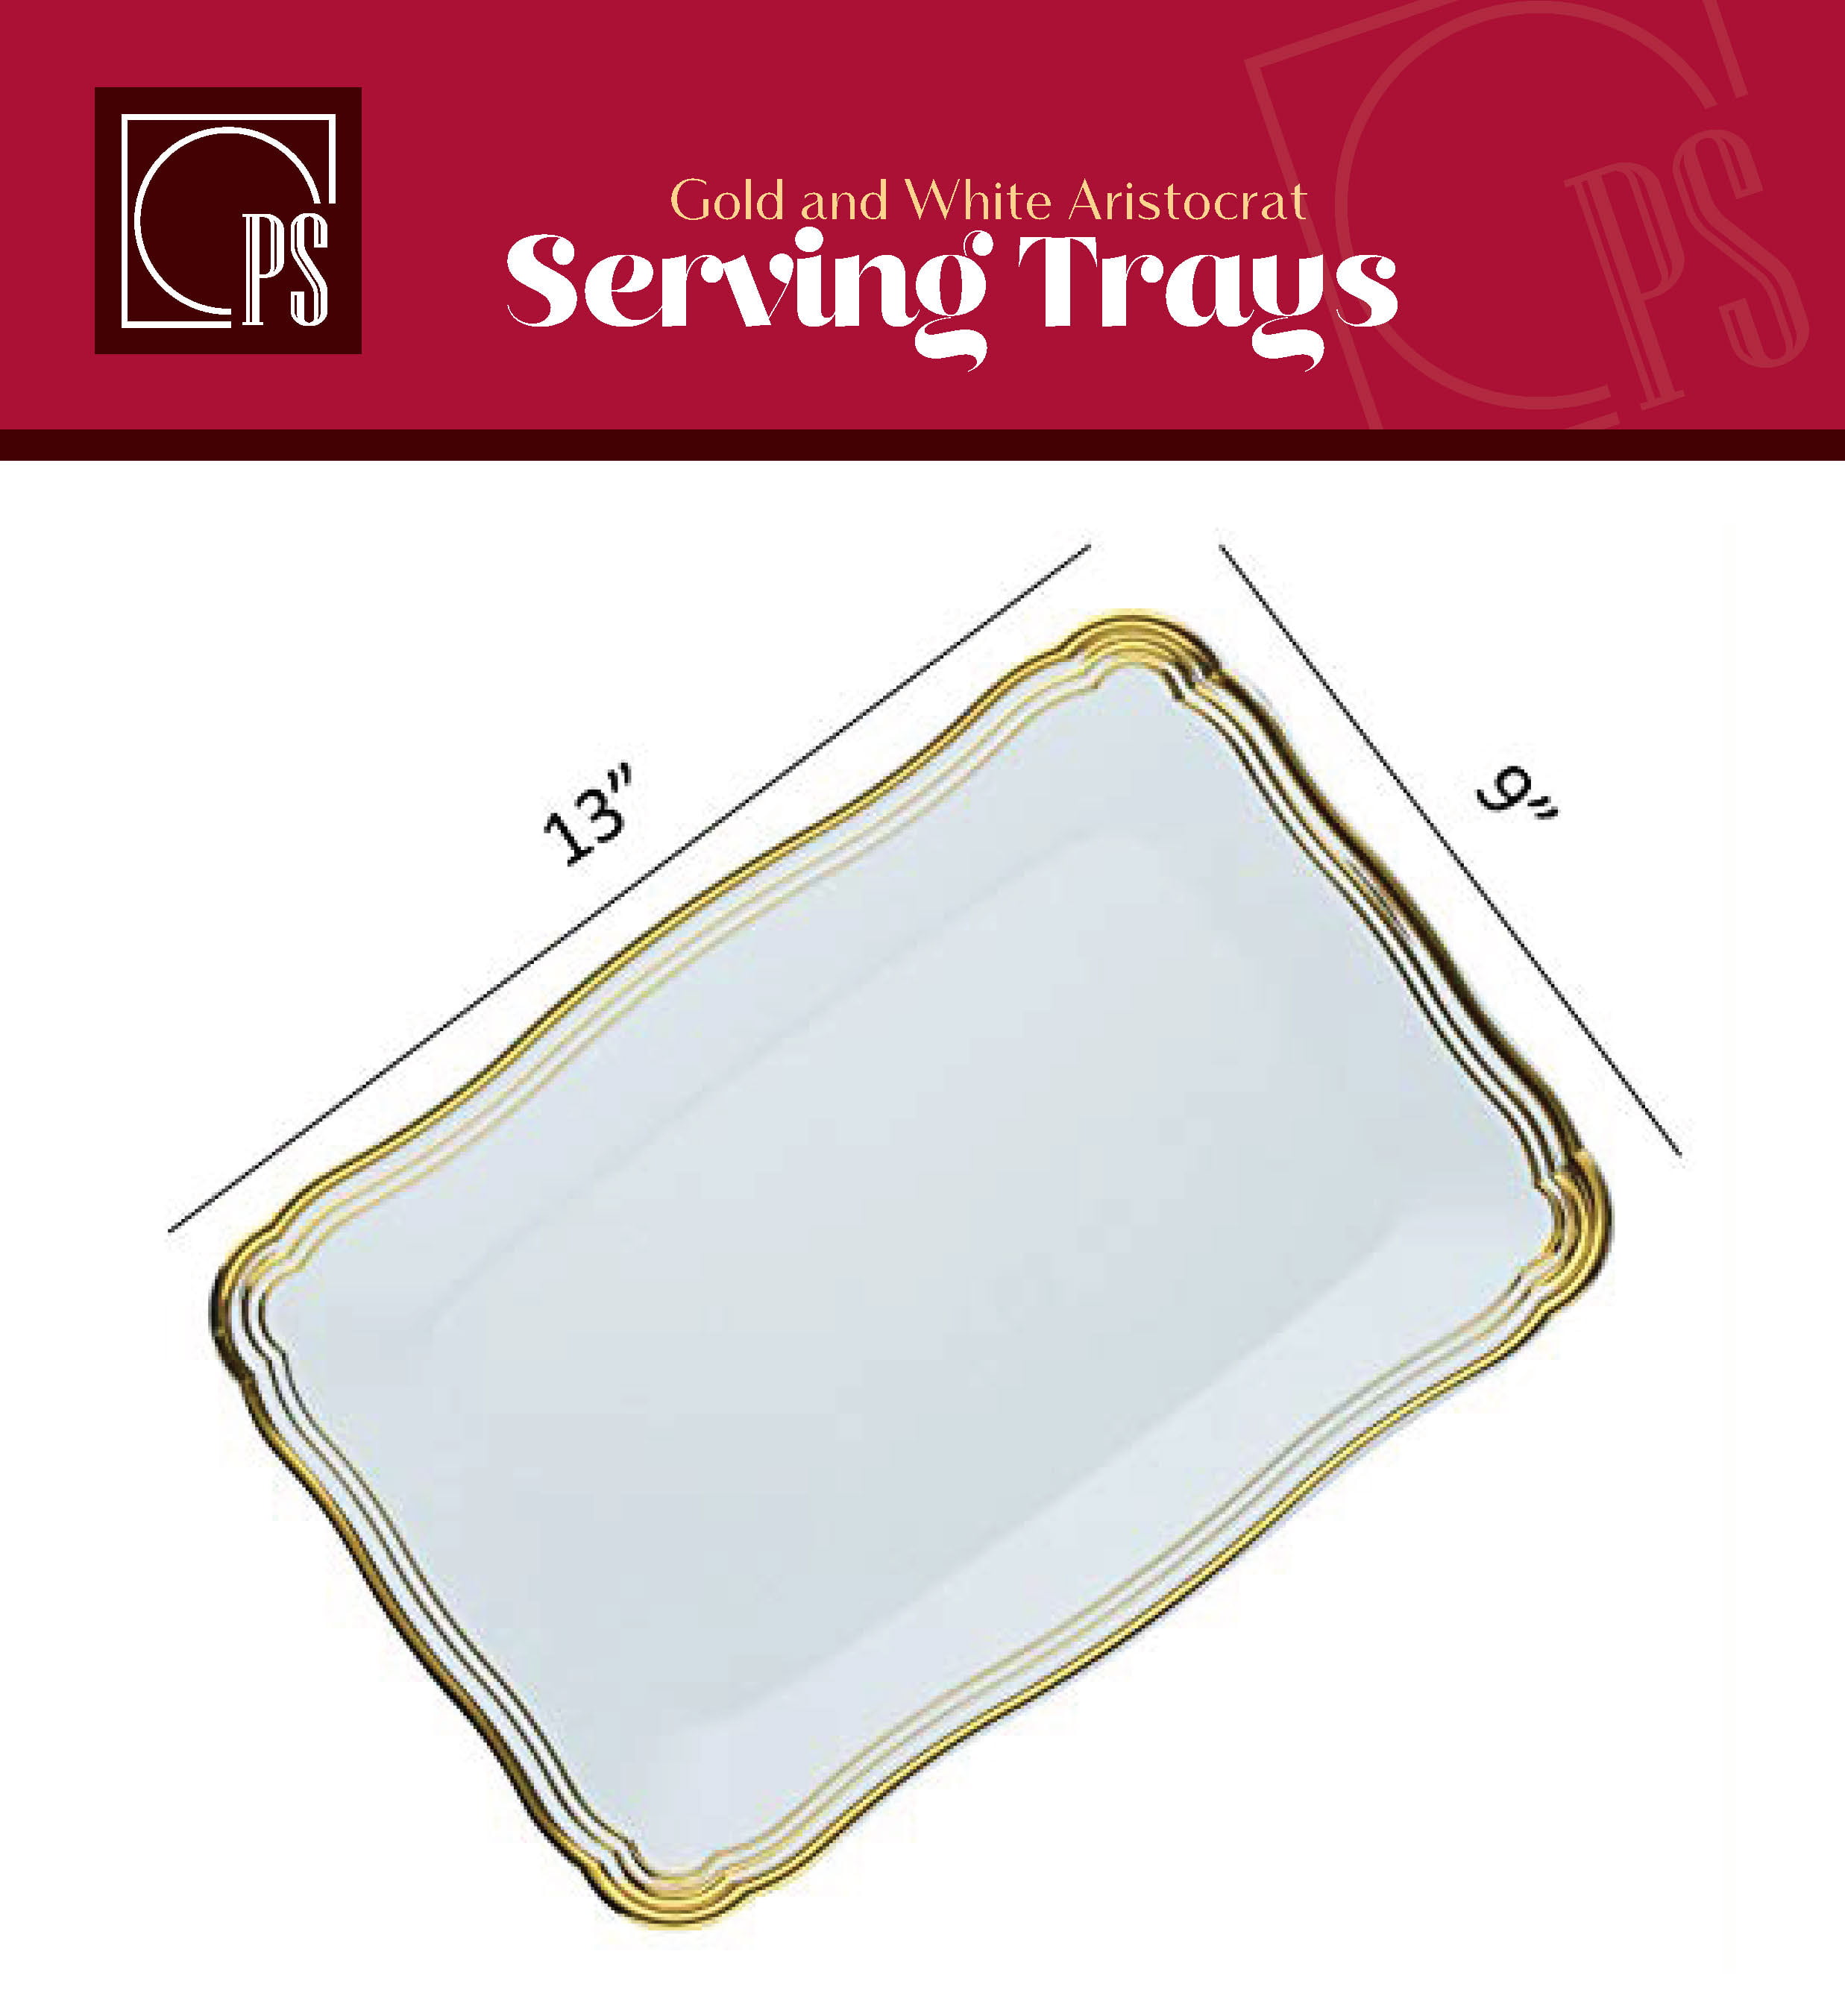 White Rectangular Serving Trays With Silver Rim Plastic Serving Tray 6 Pack - Posh Setting Disposable Heavyweight Christmas Party Serving Platters 13.75 x 6 